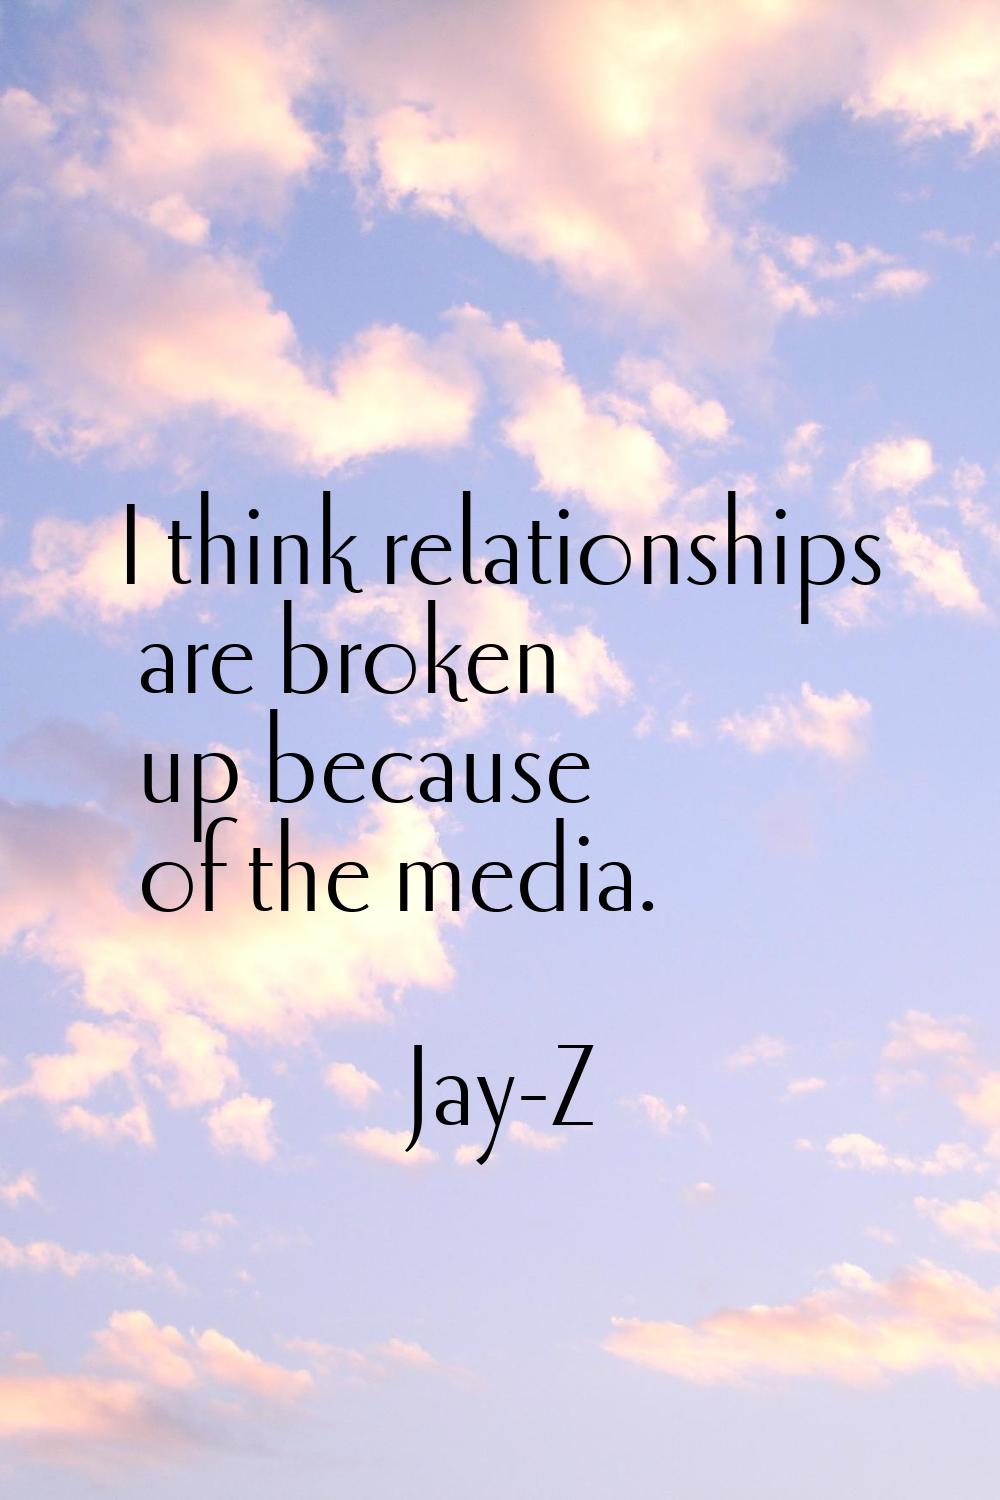 I think relationships are broken up because of the media.